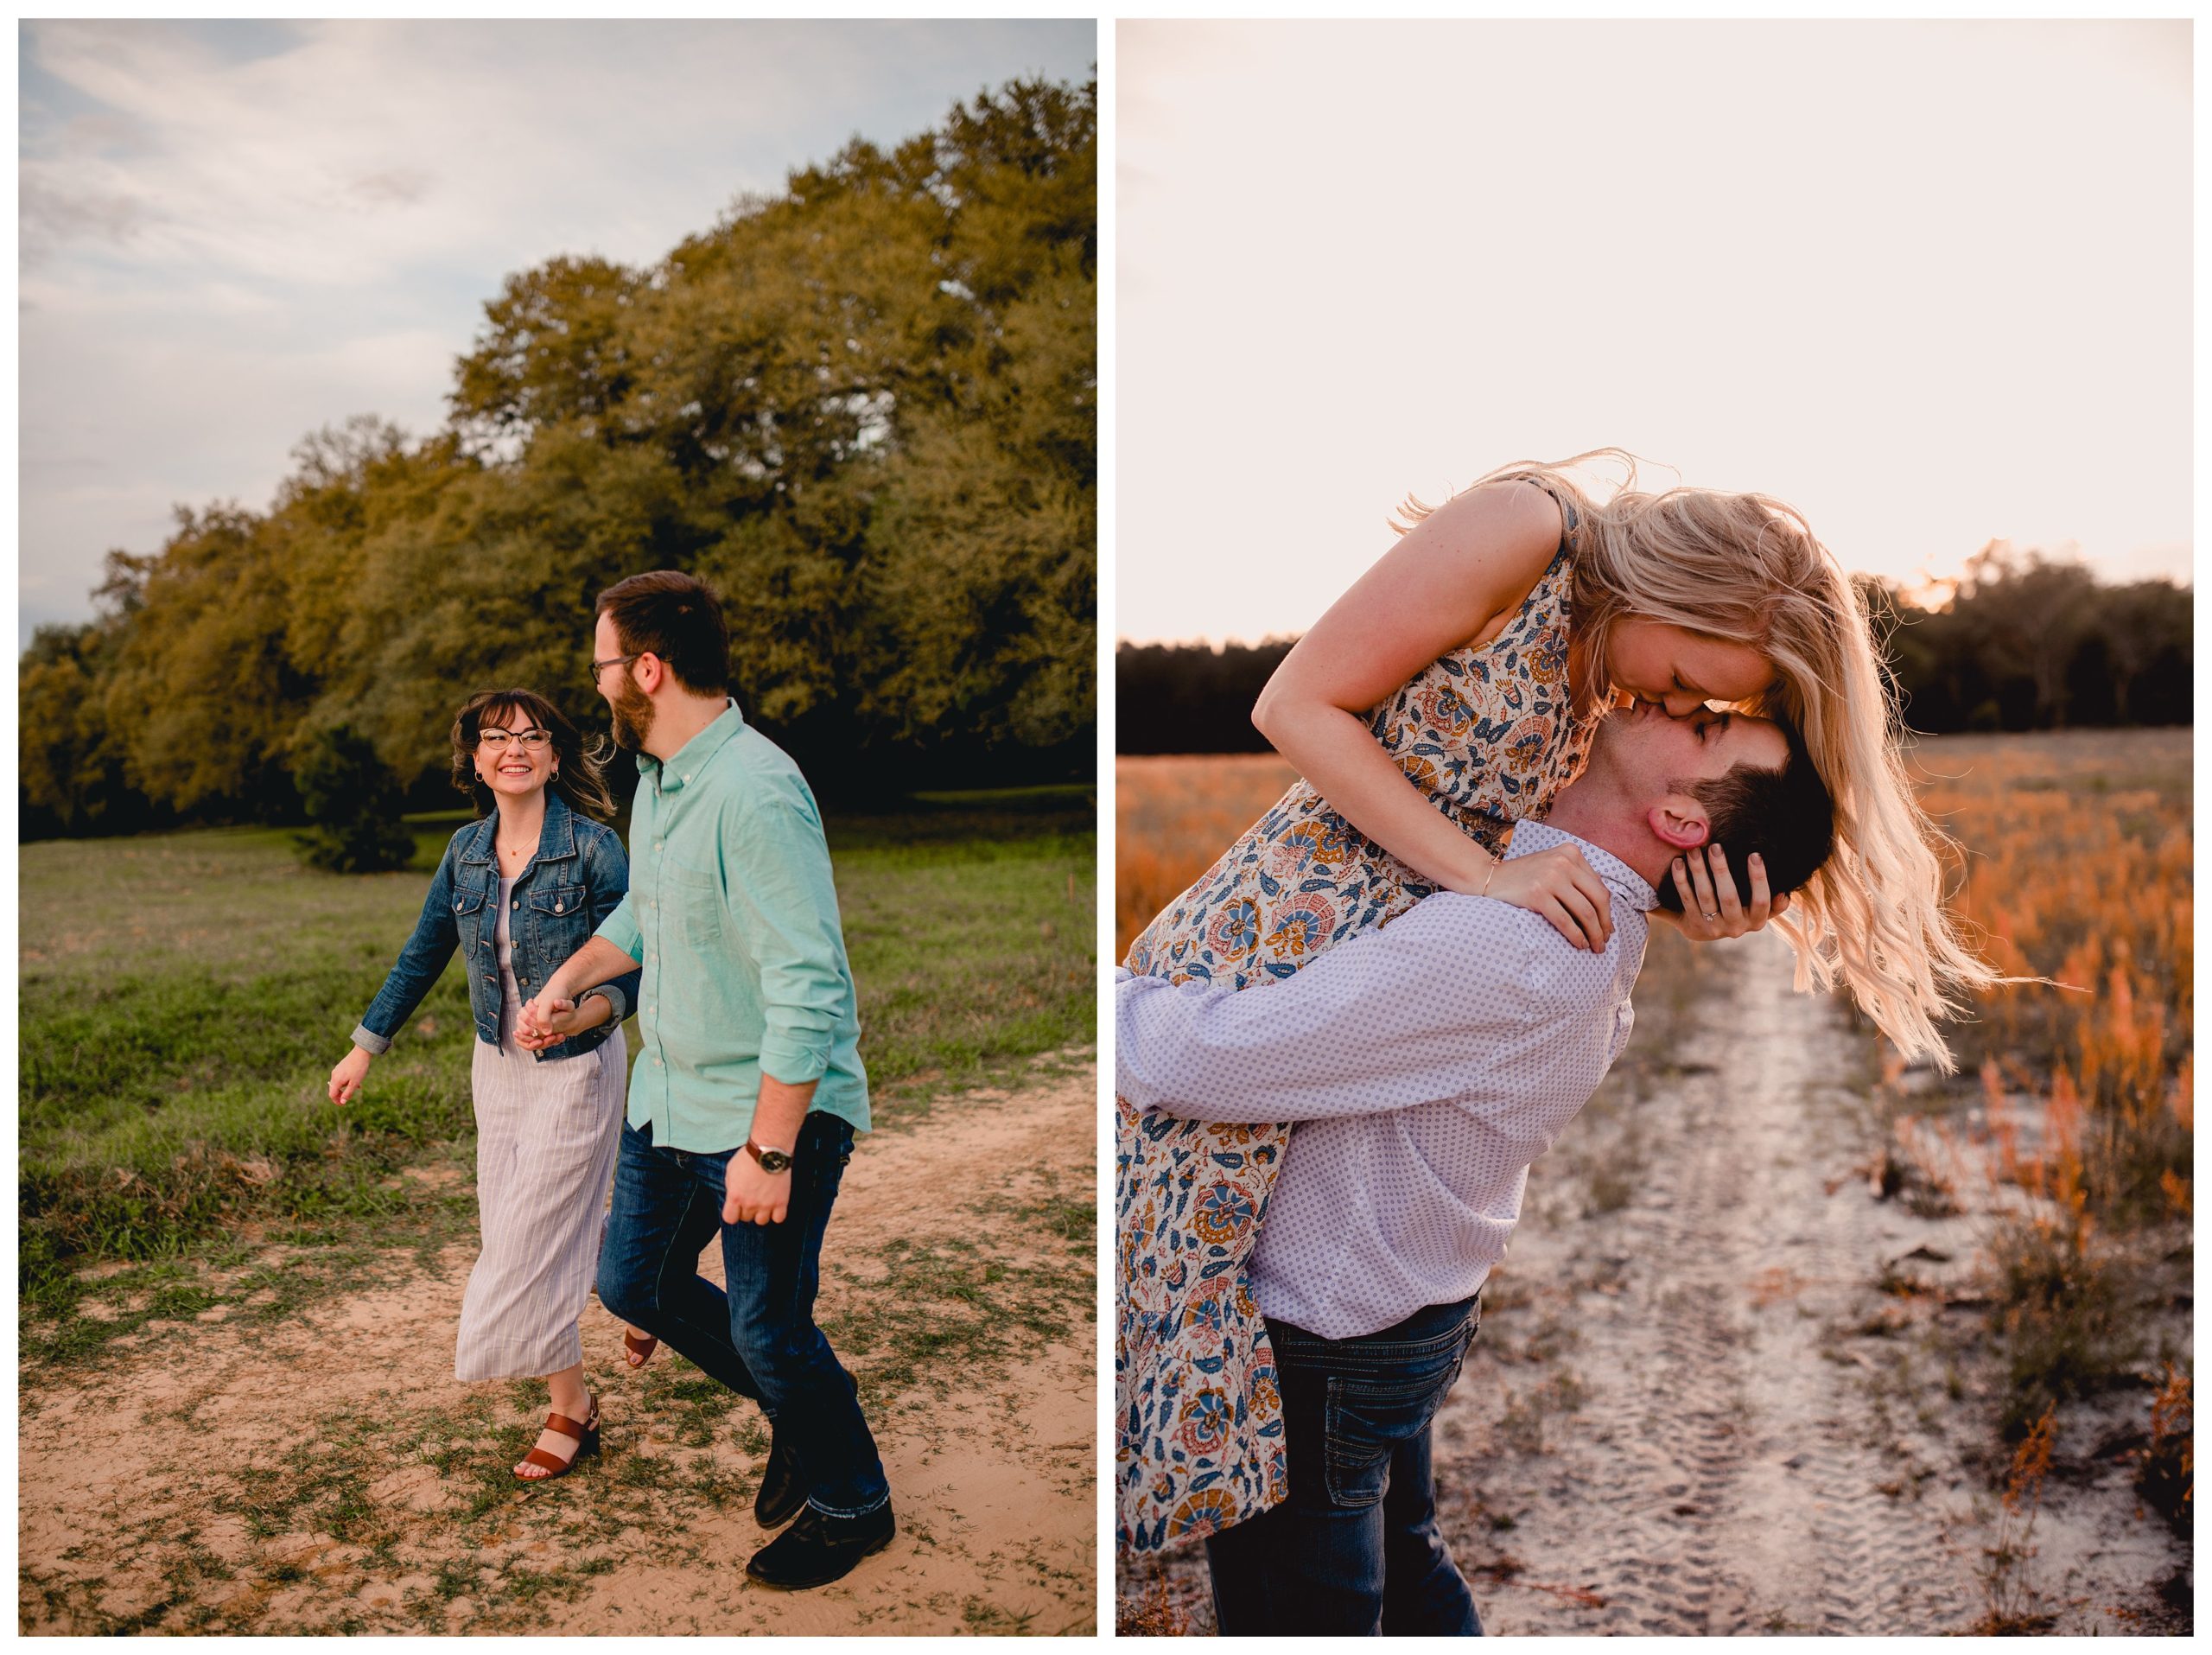 Interactive and fun engagement photos taken by lifestyle wedding photographer.